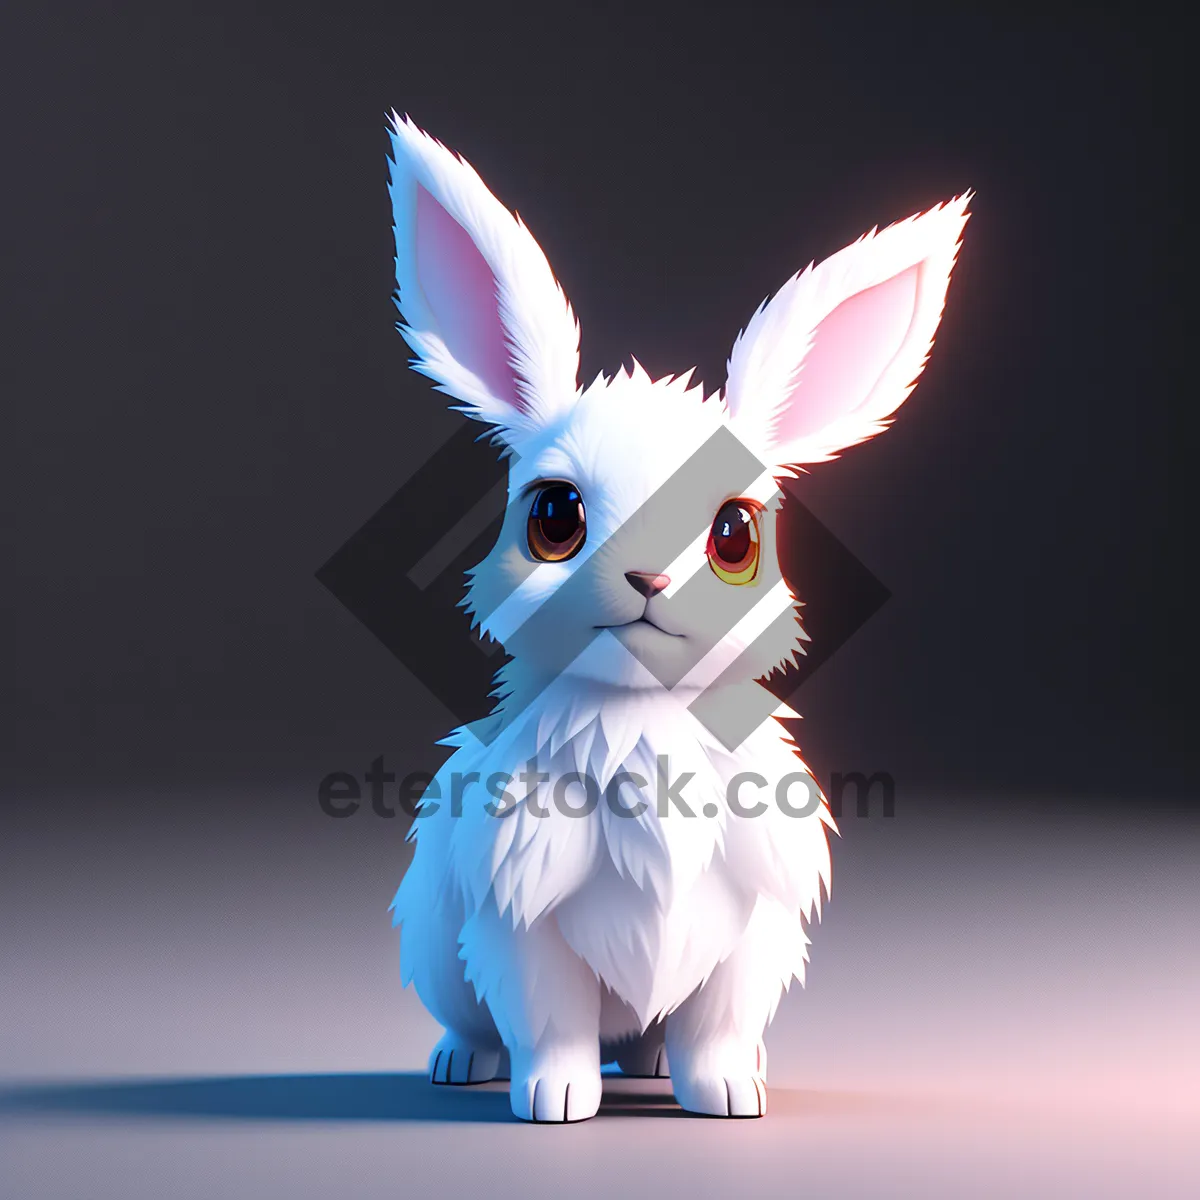 Picture of In a studio portrait, a fluffy bunny with irresistibly cute ears steals the spotlight, capturing hearts effortlessly